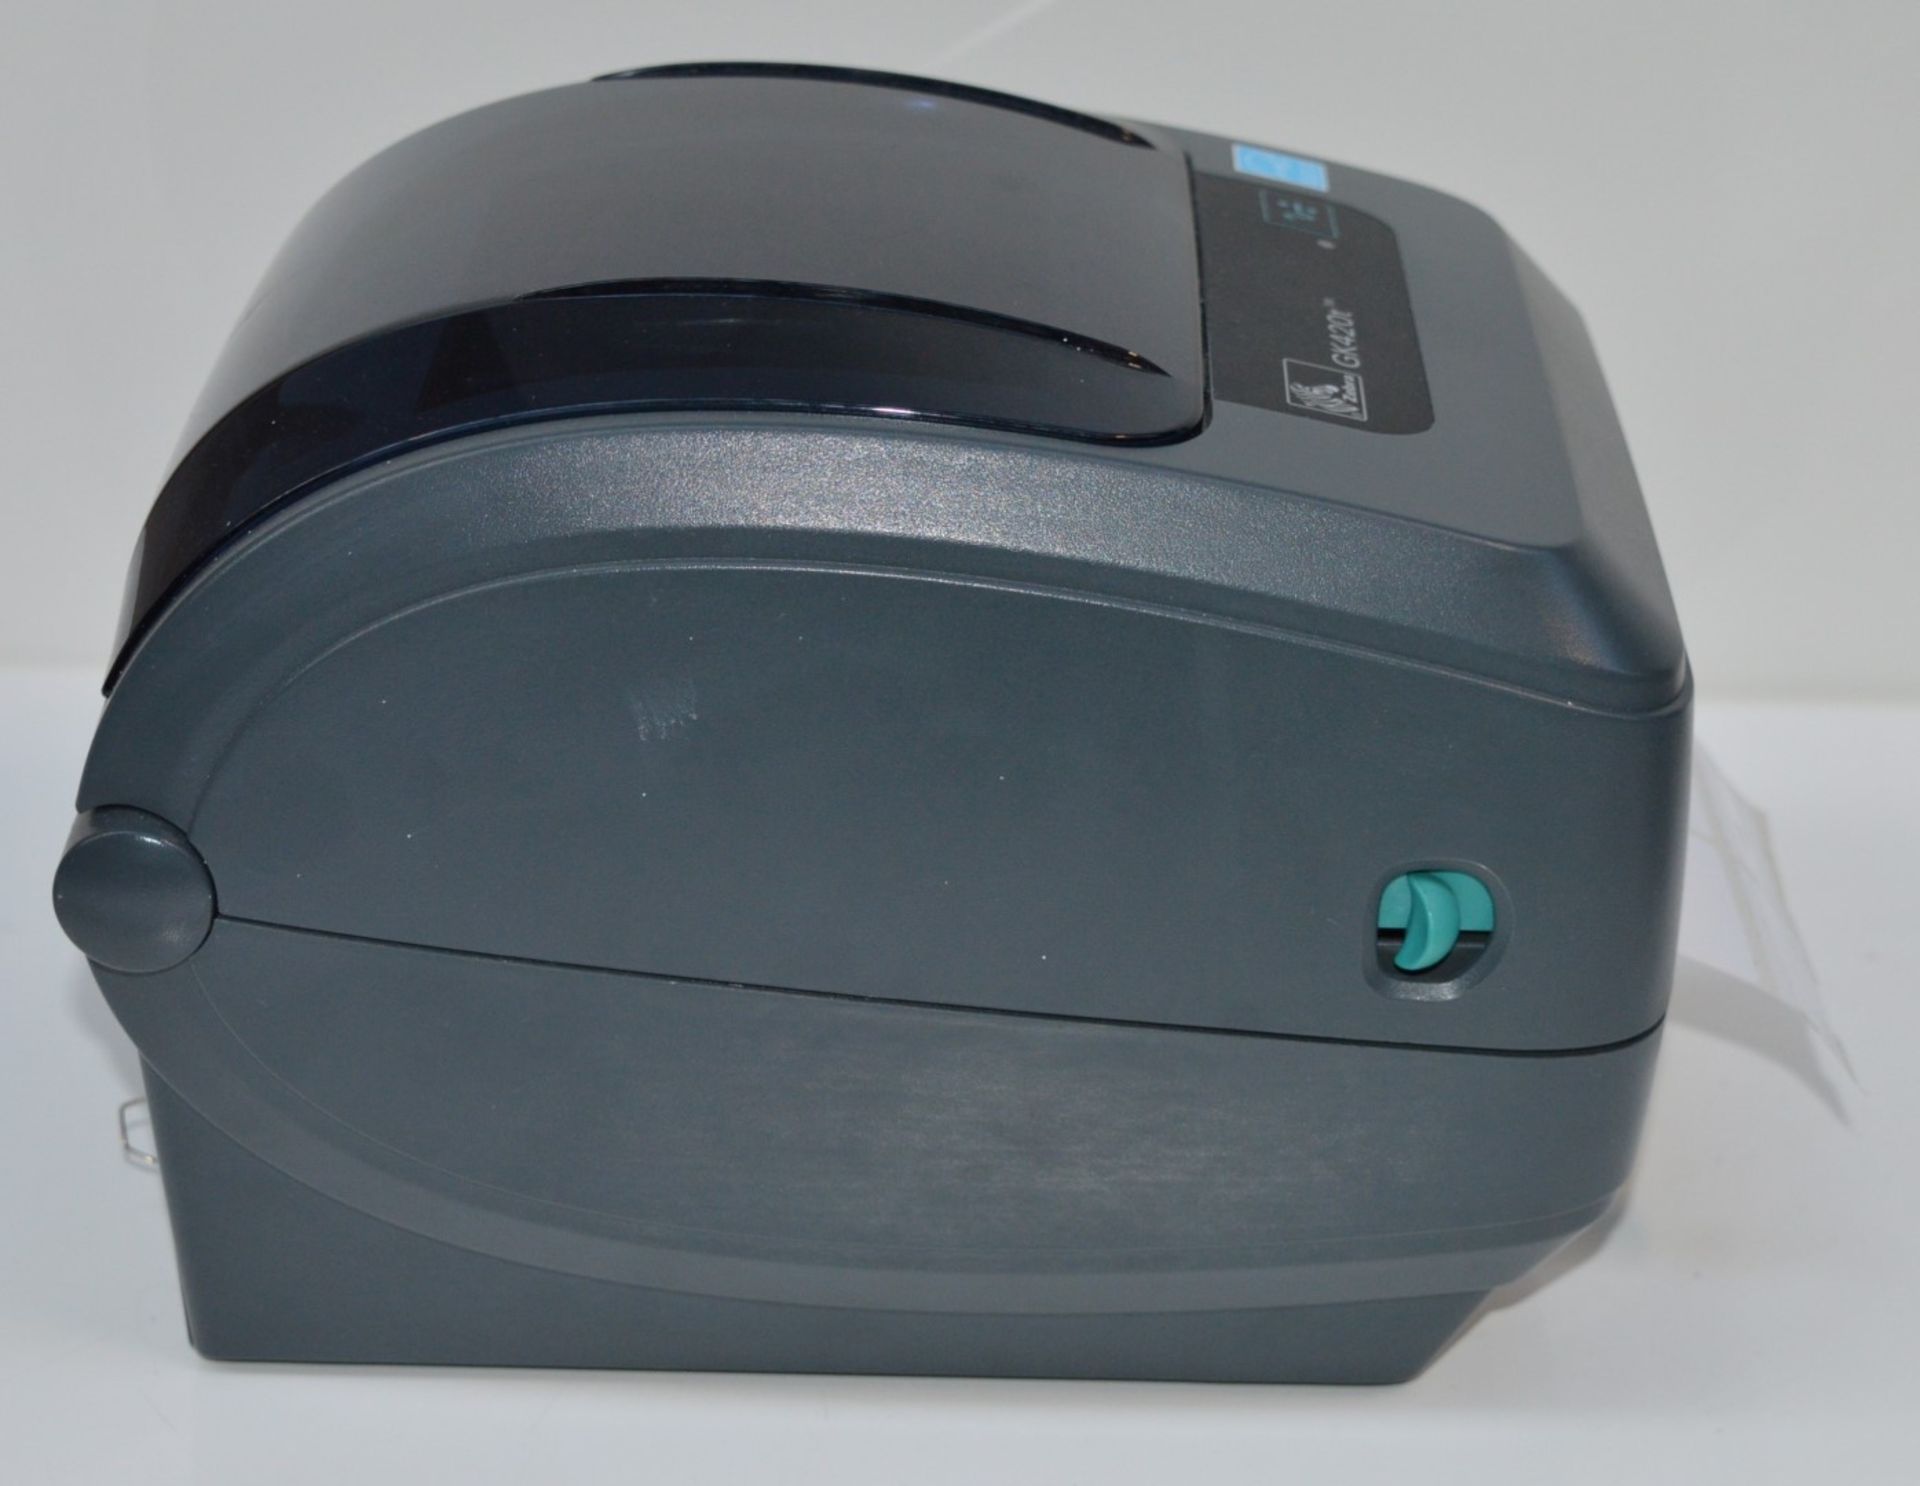 1 x Zebra GK420t Thermal Transfer Label Printer - USB & Serial Connectivity - Includes Cables - - Image 6 of 10